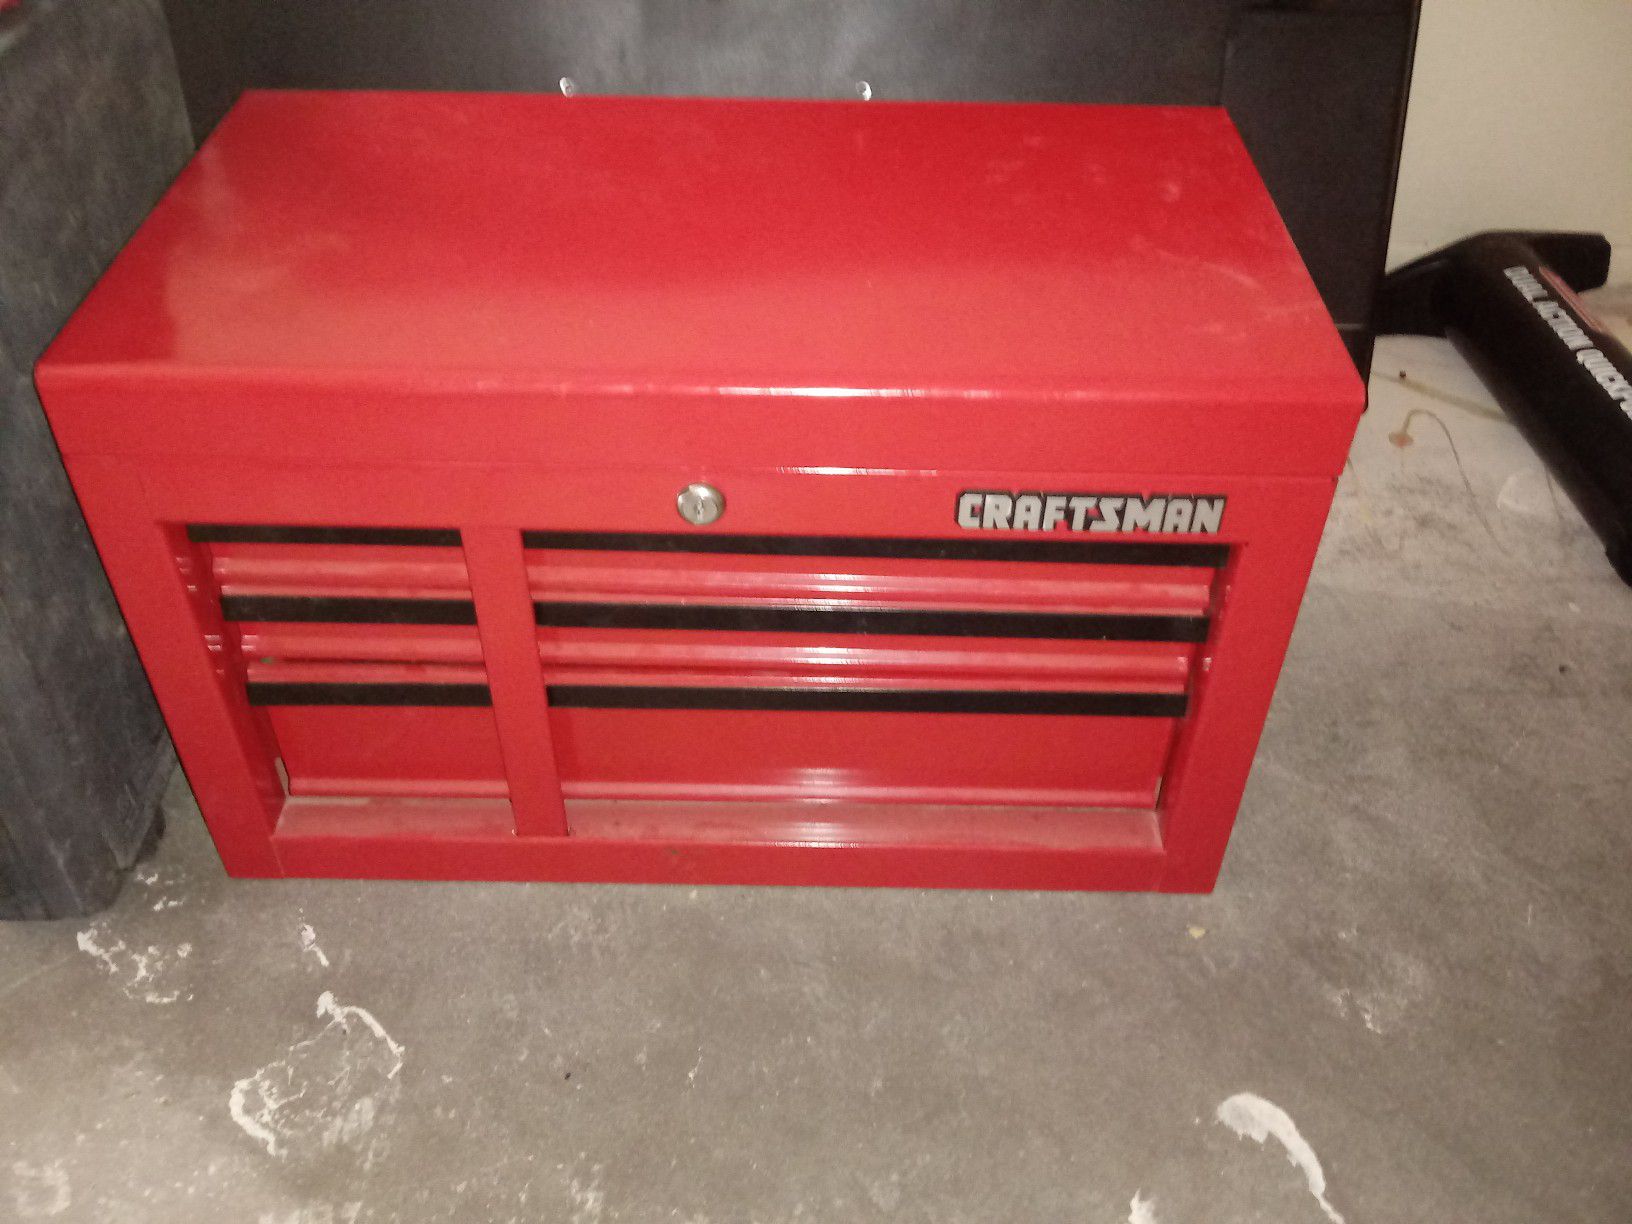 New craftsman tool box with keys had it sold but the guy didn't show up so im putting it back up